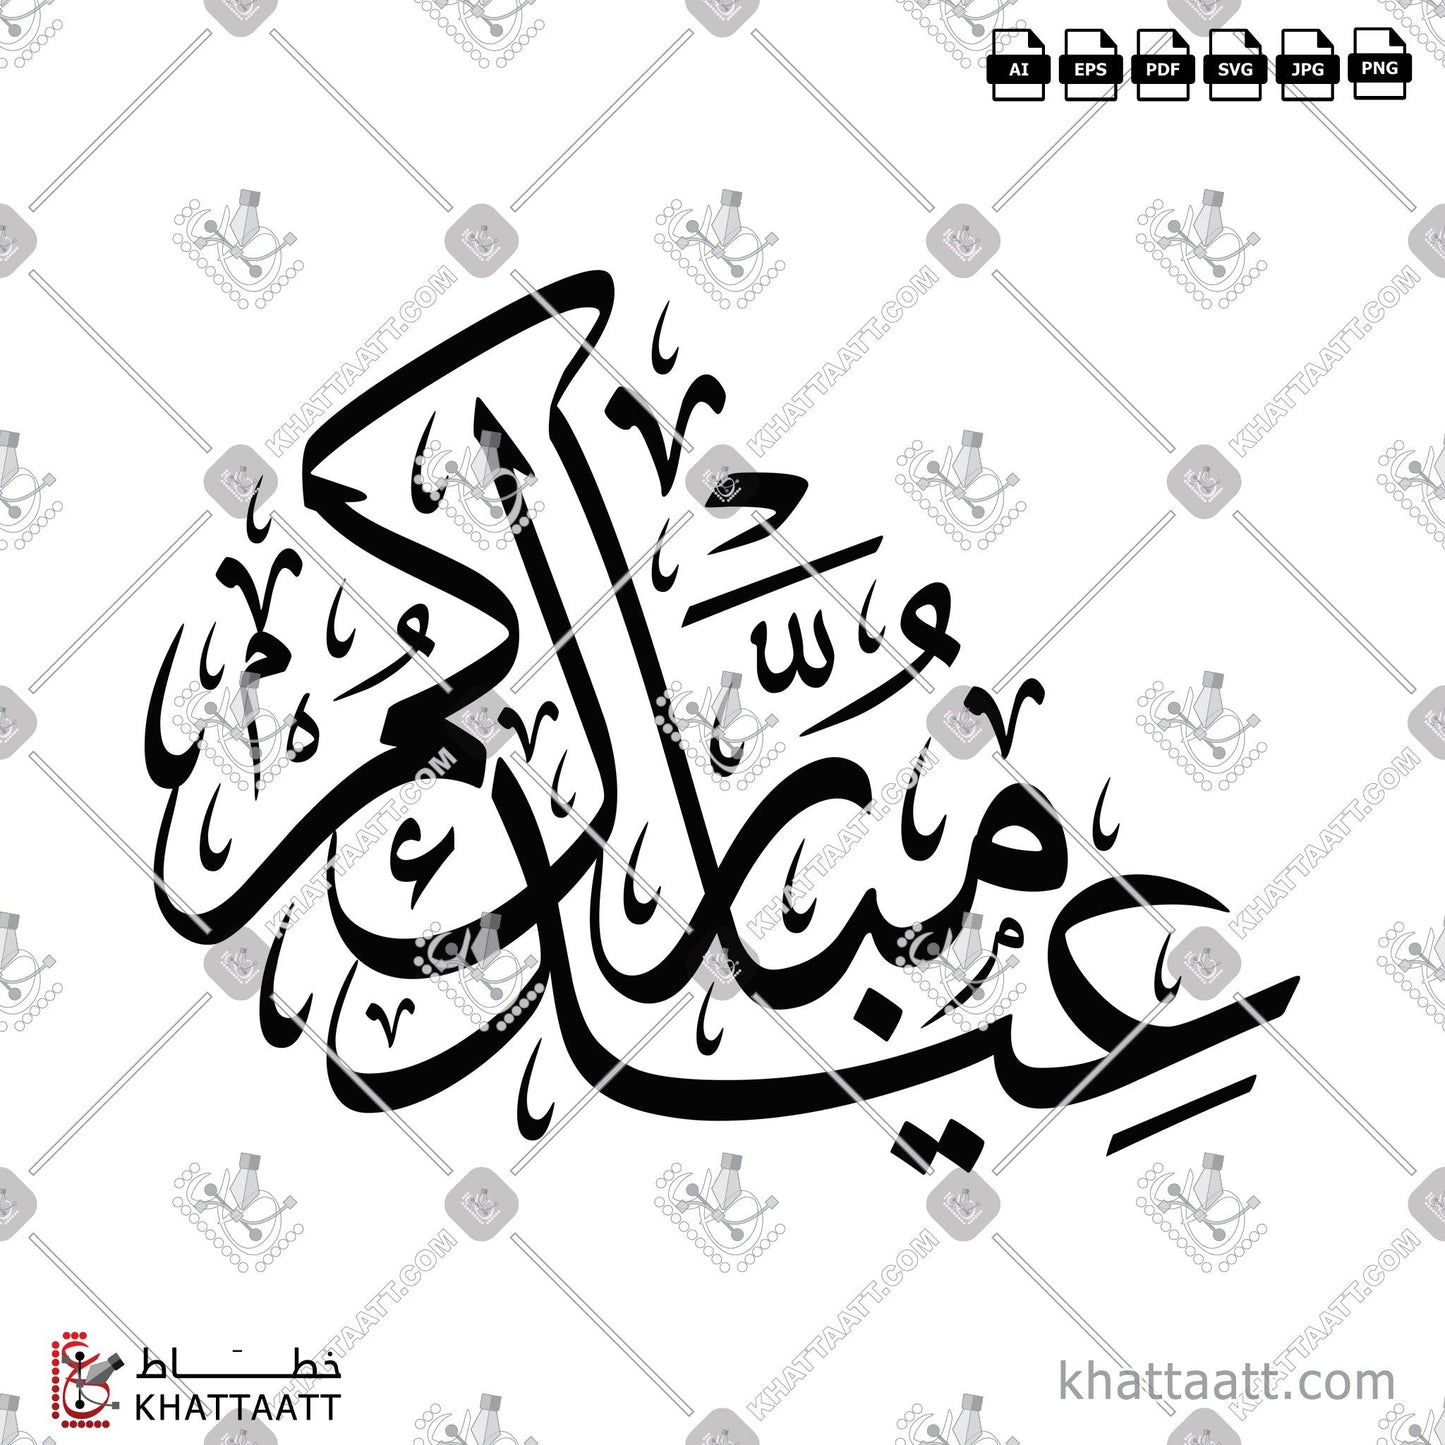 Download Arabic Calligraphy of عيدكم مبارك in Thuluth - خط الثلث in vector and .png